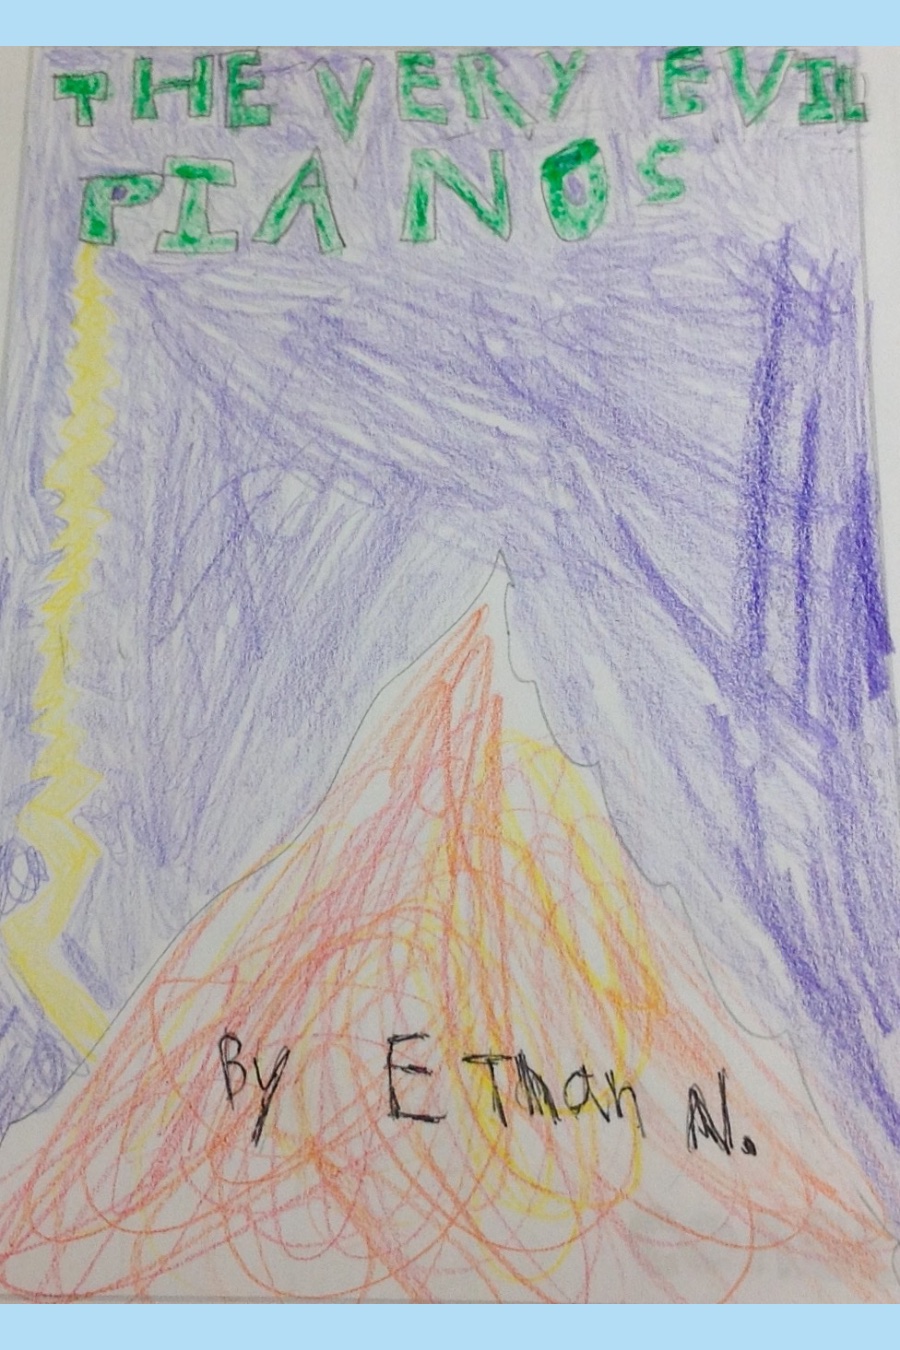 The Very Evil Pianos by Ethan N